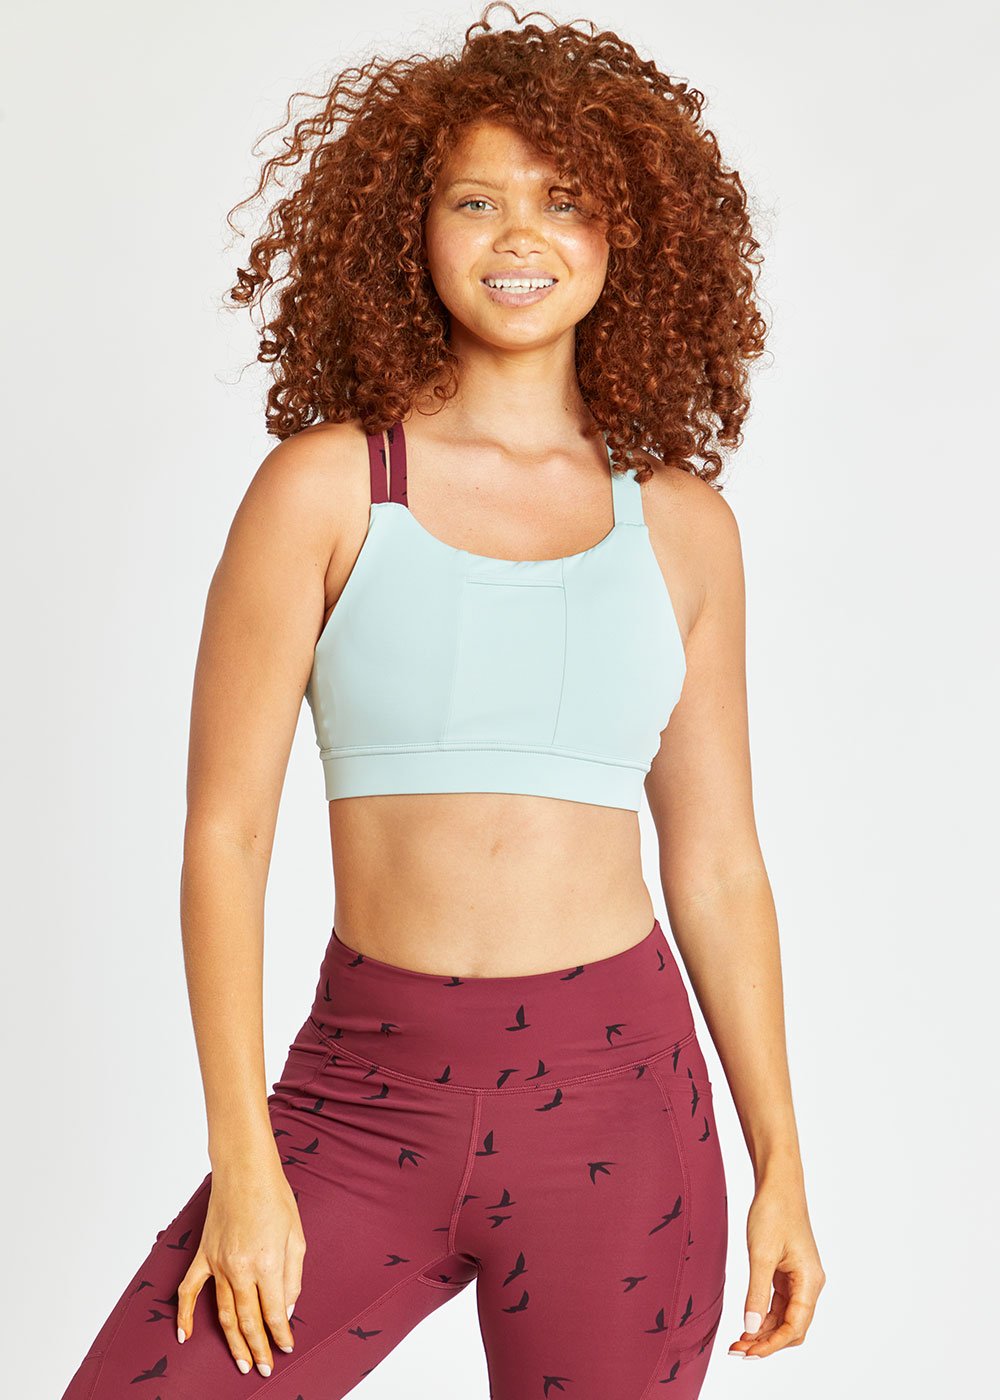 How to Run in a Sports Bra (and JUST a Sports Bra) – OISELLE